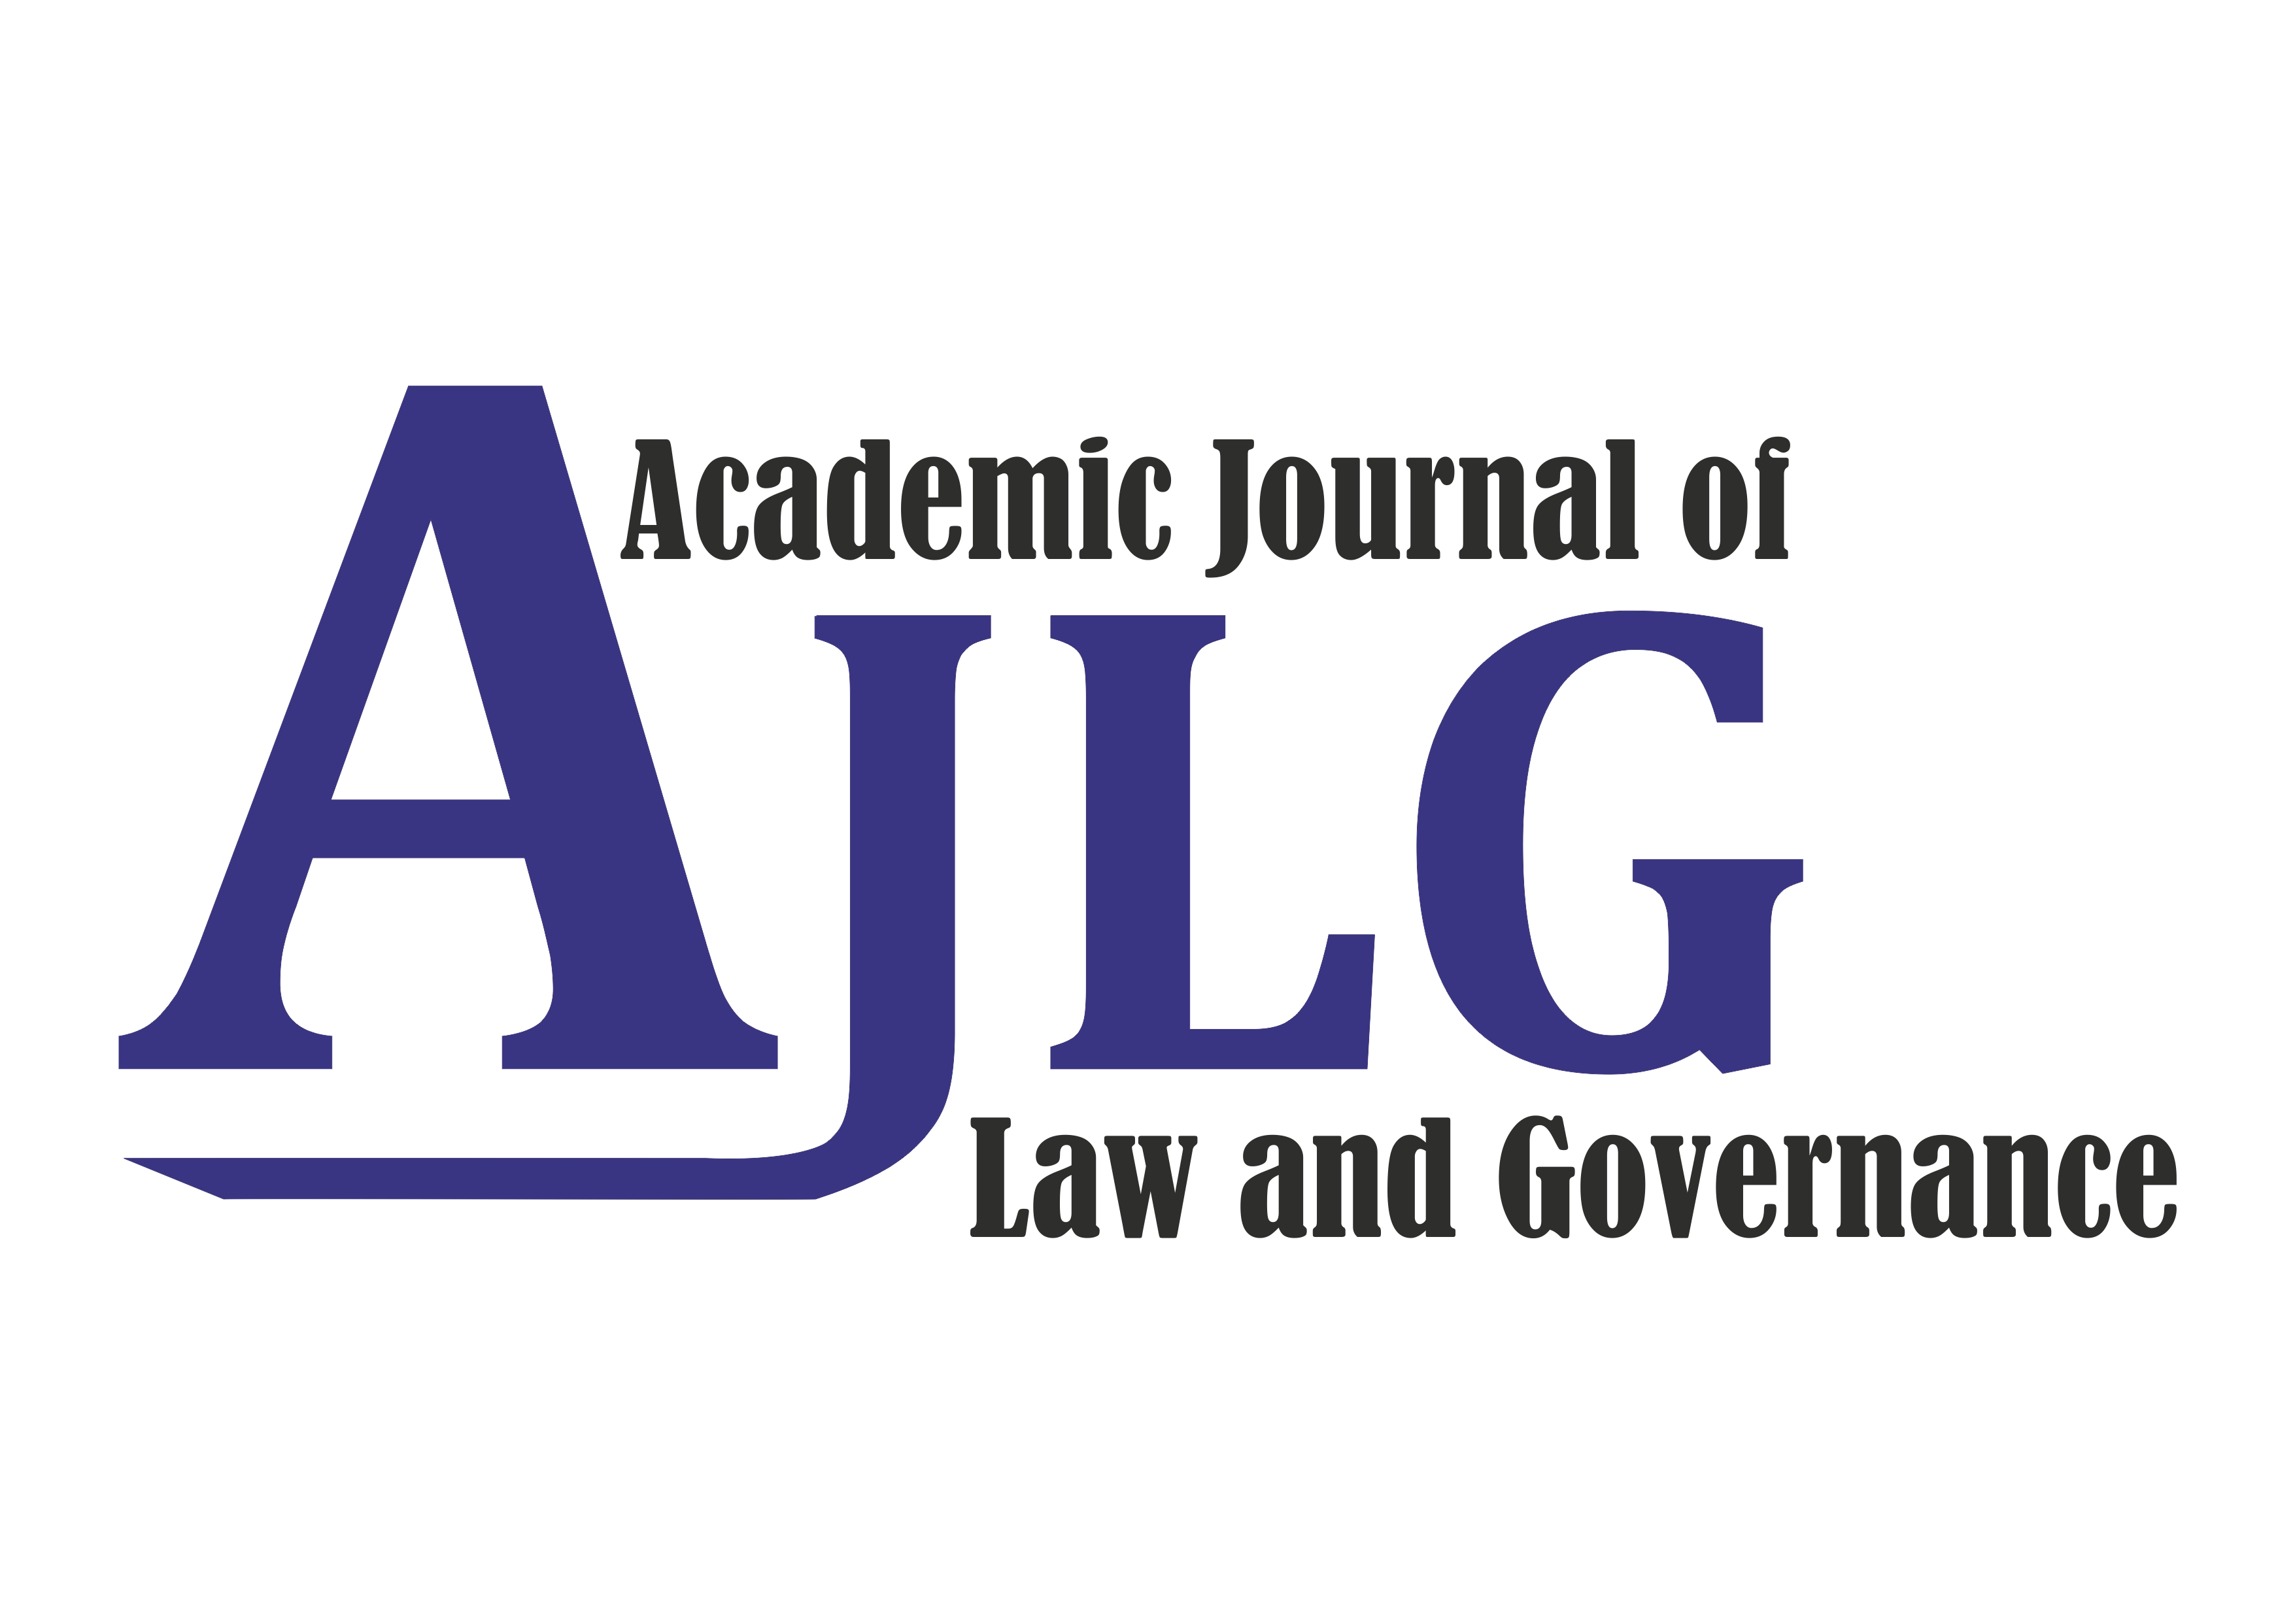 ACADEMIC JOURNAL OF LAW AND GOVERNANCE